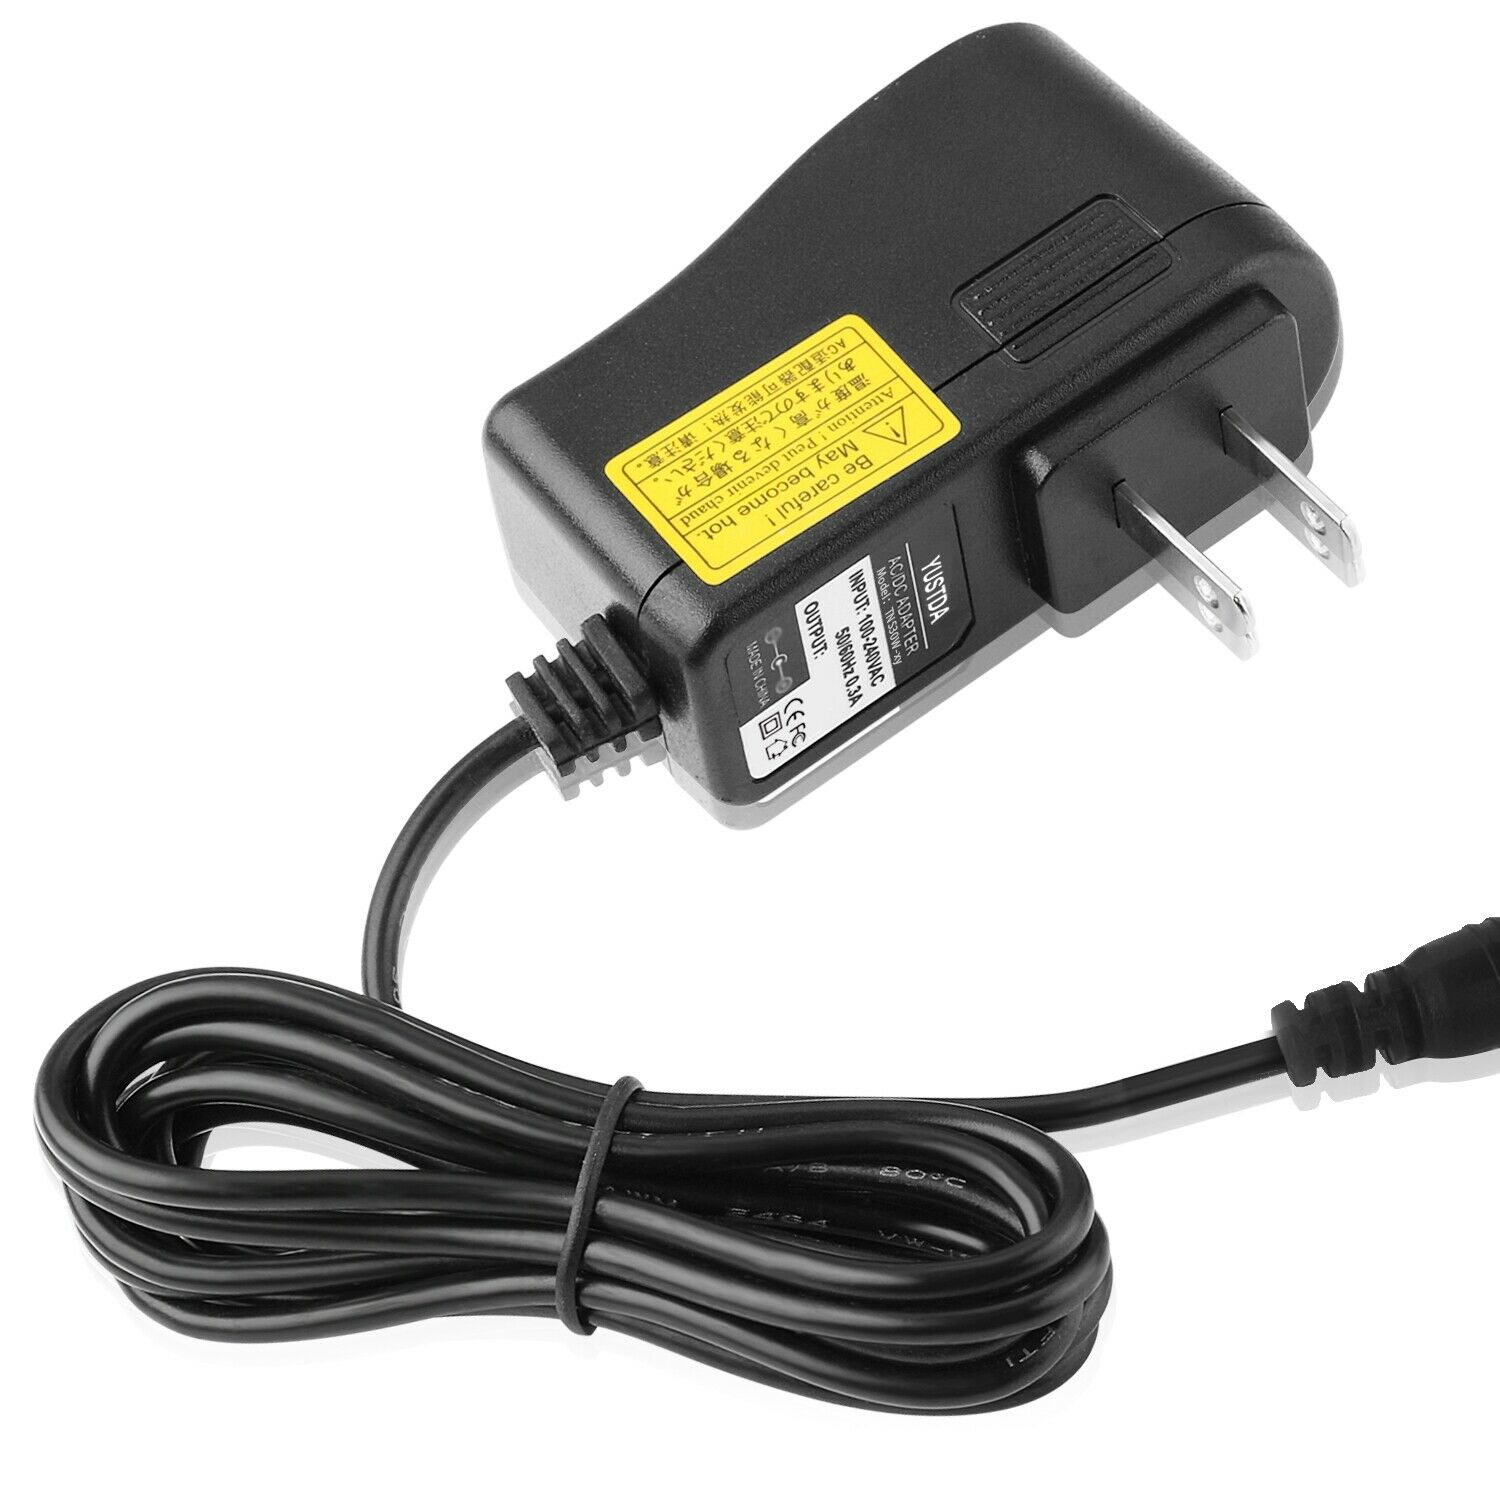 Ac Adapter fit My Keepon Interactive Dancing Robot Toy Charger Power Supply Type: AC/DC adapter Ho